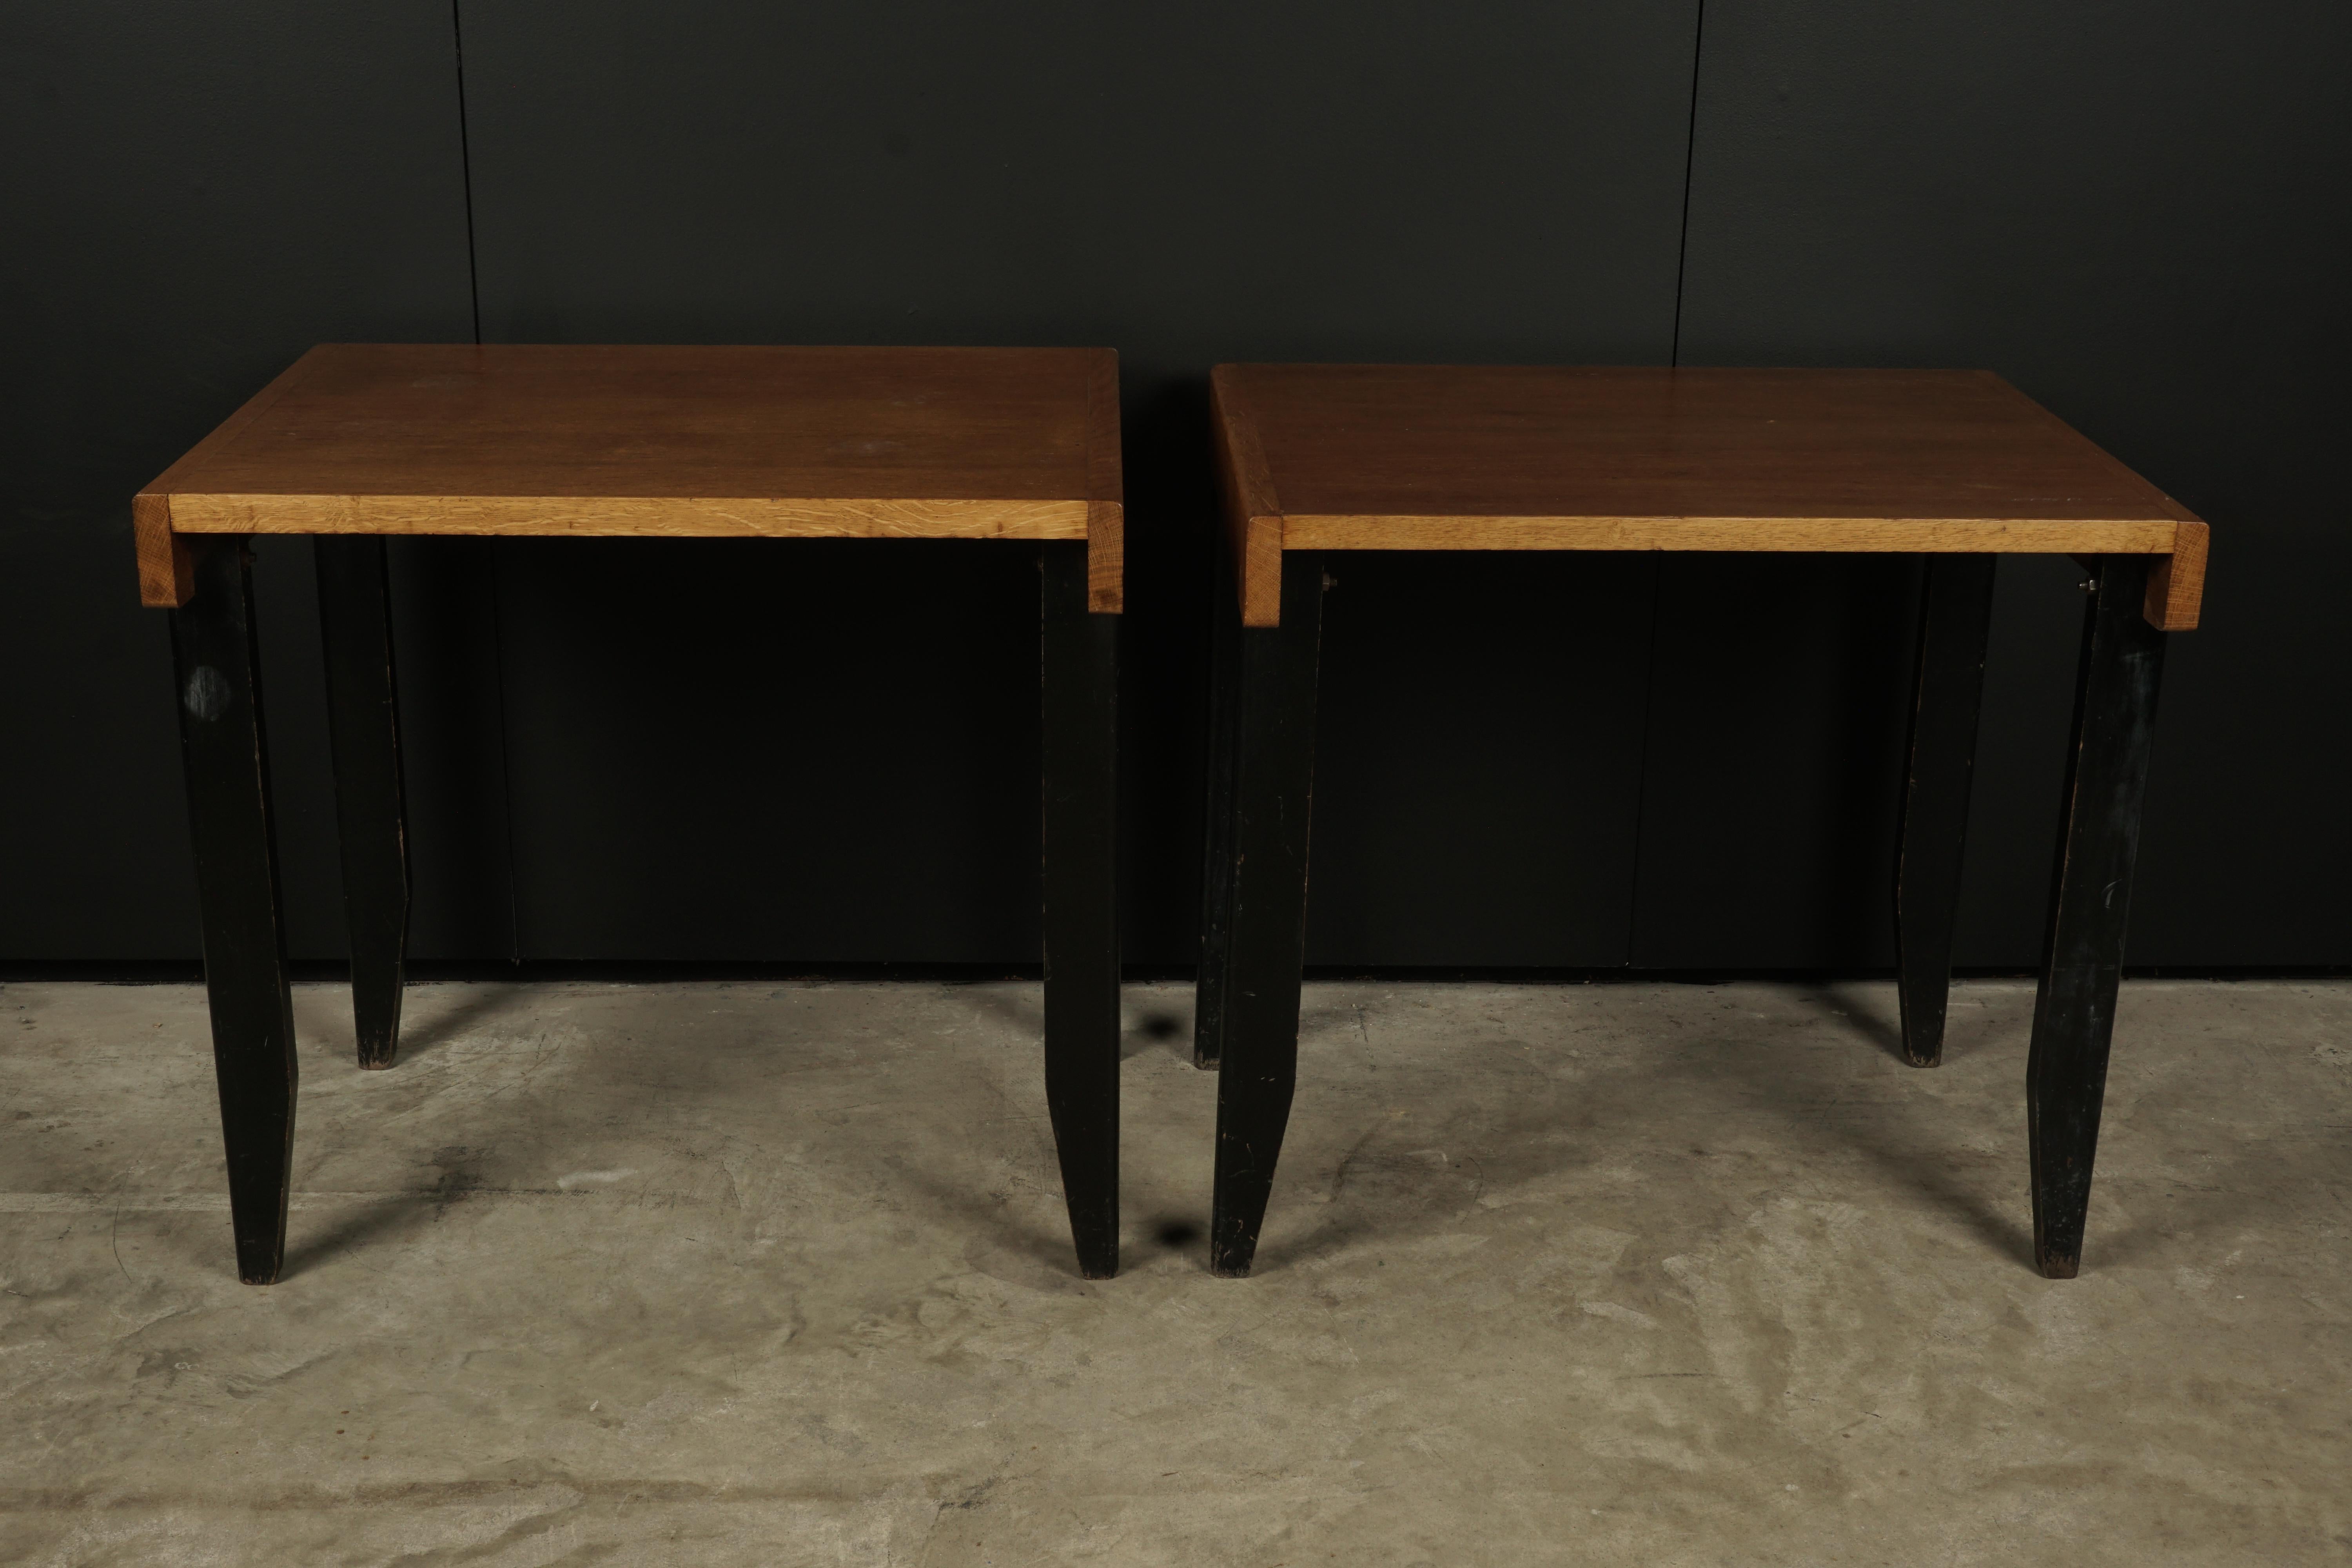 Rare vintage pair of side tables from France, circa 1960. Solid oak construction with brass hardware. Unknown designer.